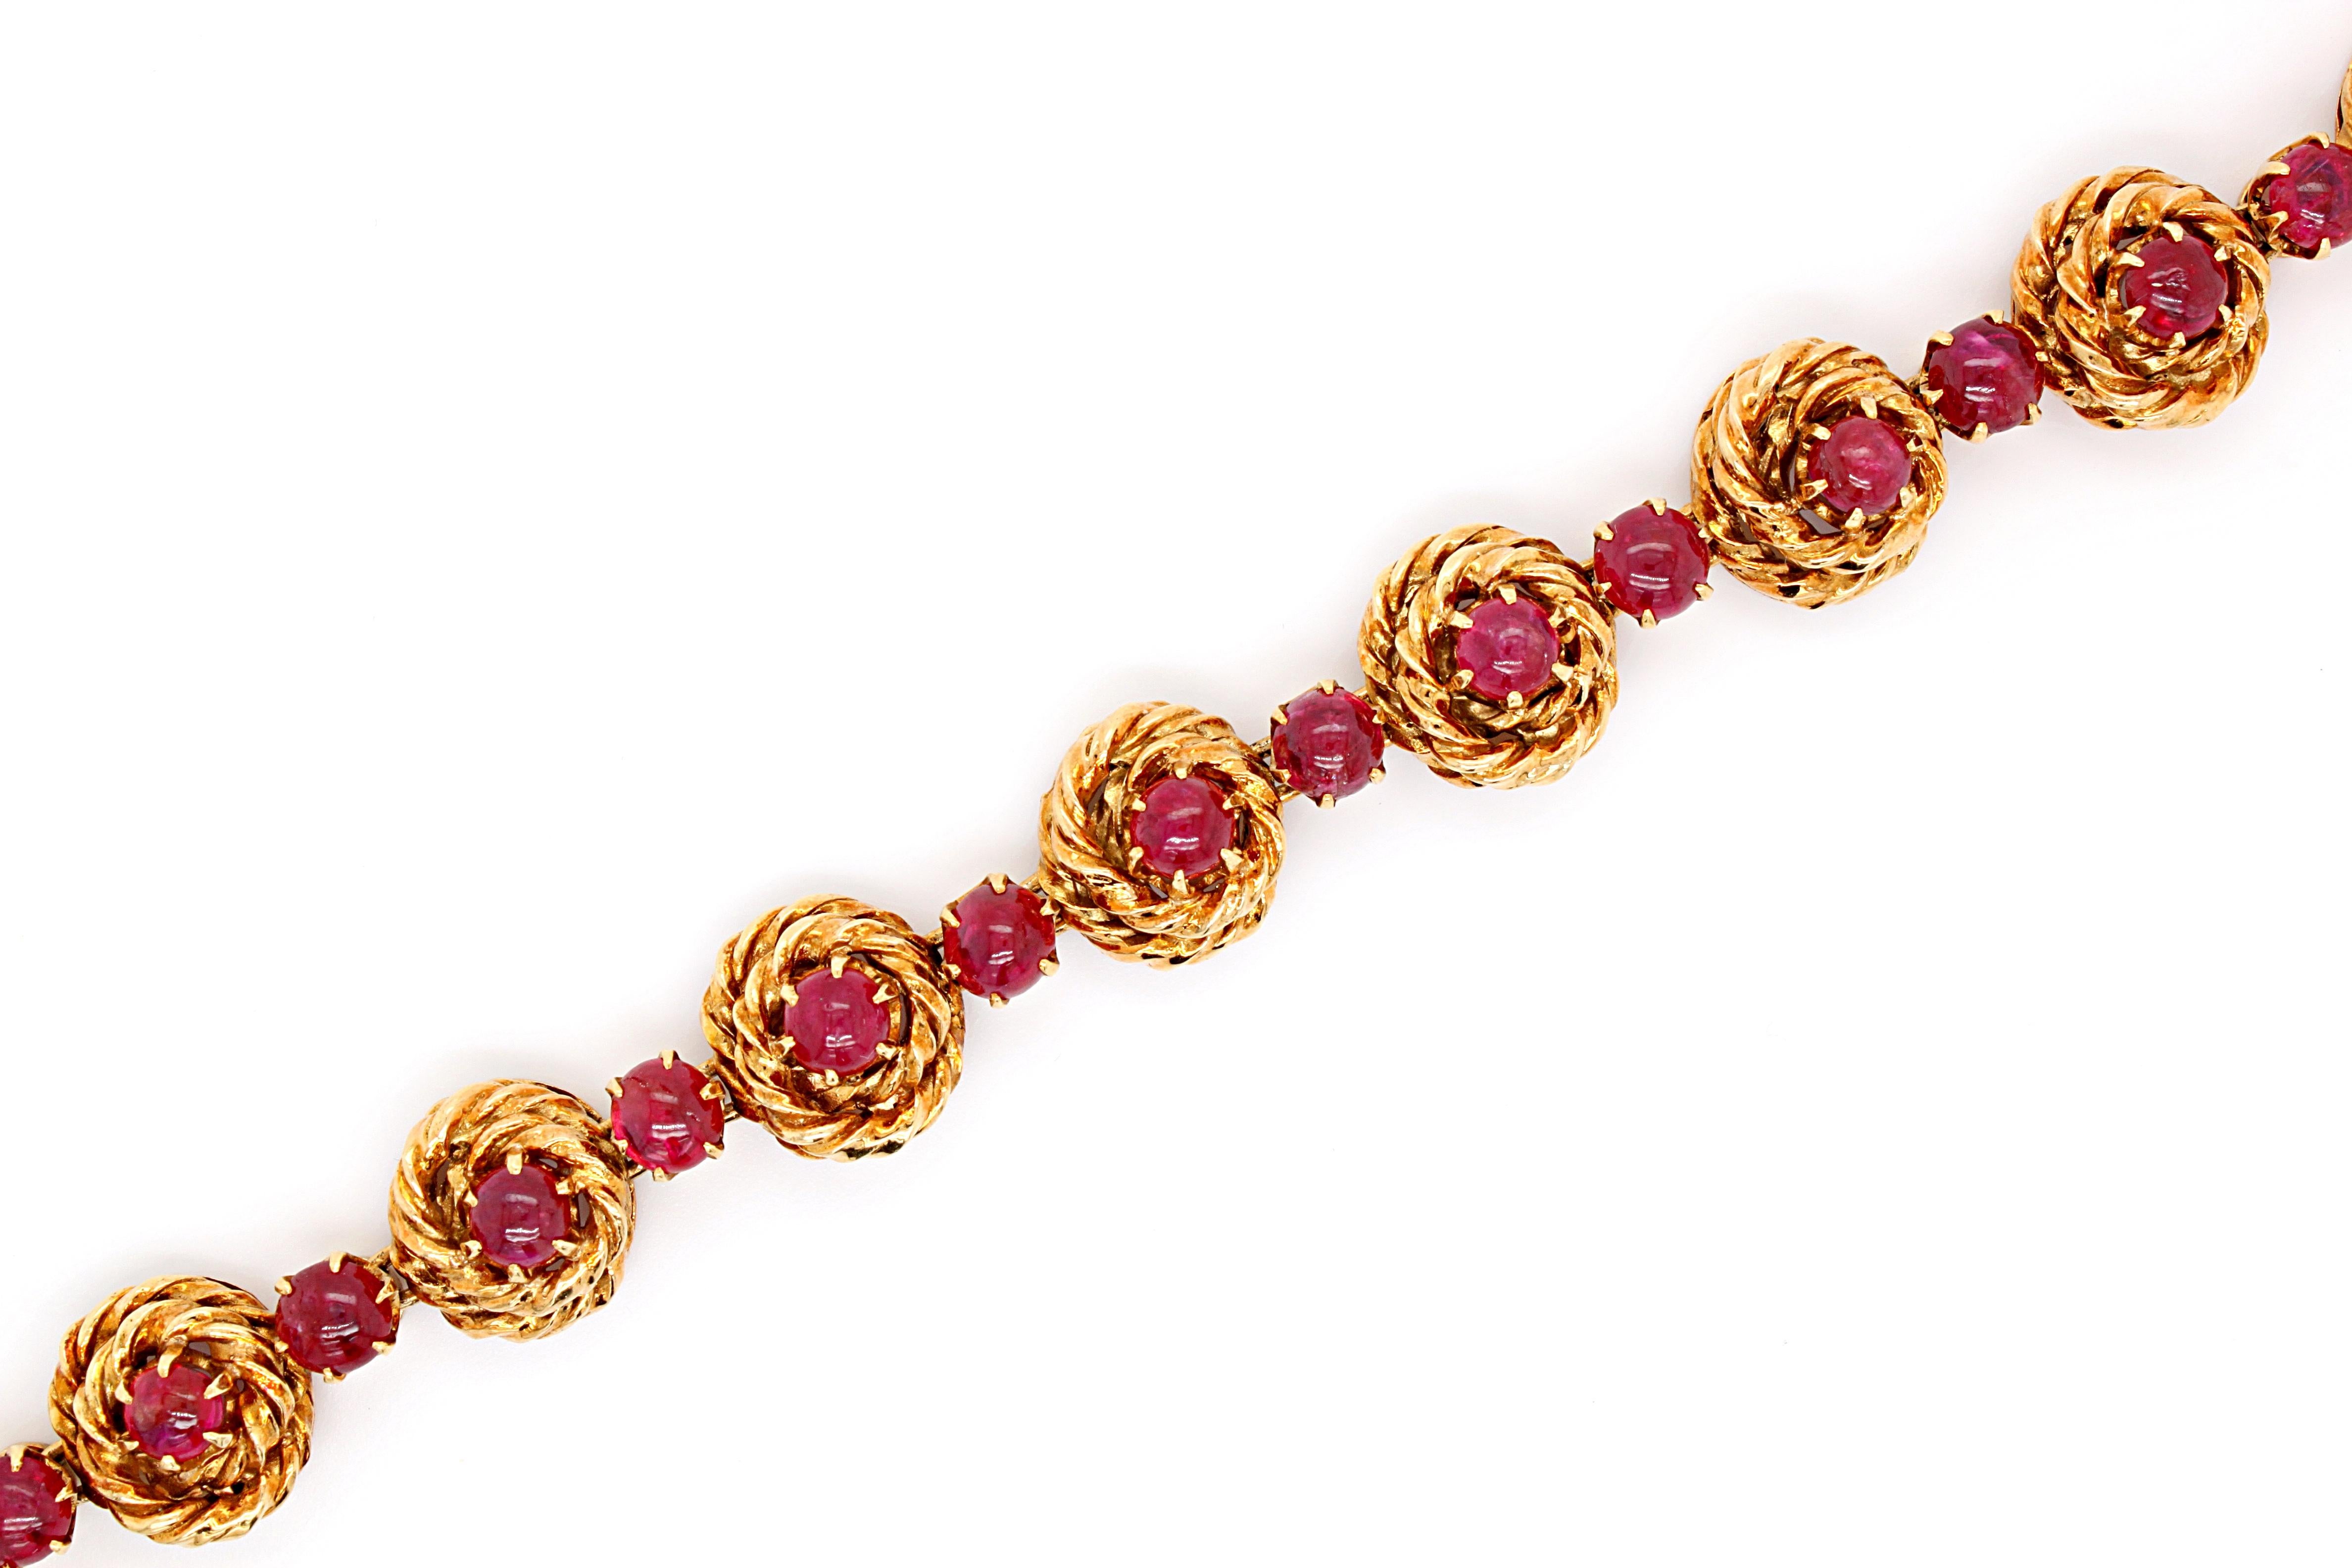 Ruby cabochon bracelet in 18k yellow gold, by Van Cleef & Arpels, France, ca. 1960s. 

The bracelet has 22 interlinking parts, all freely moving and flexible. The alternating larger links in the bracelet are intricately designed like a nest. 
Each